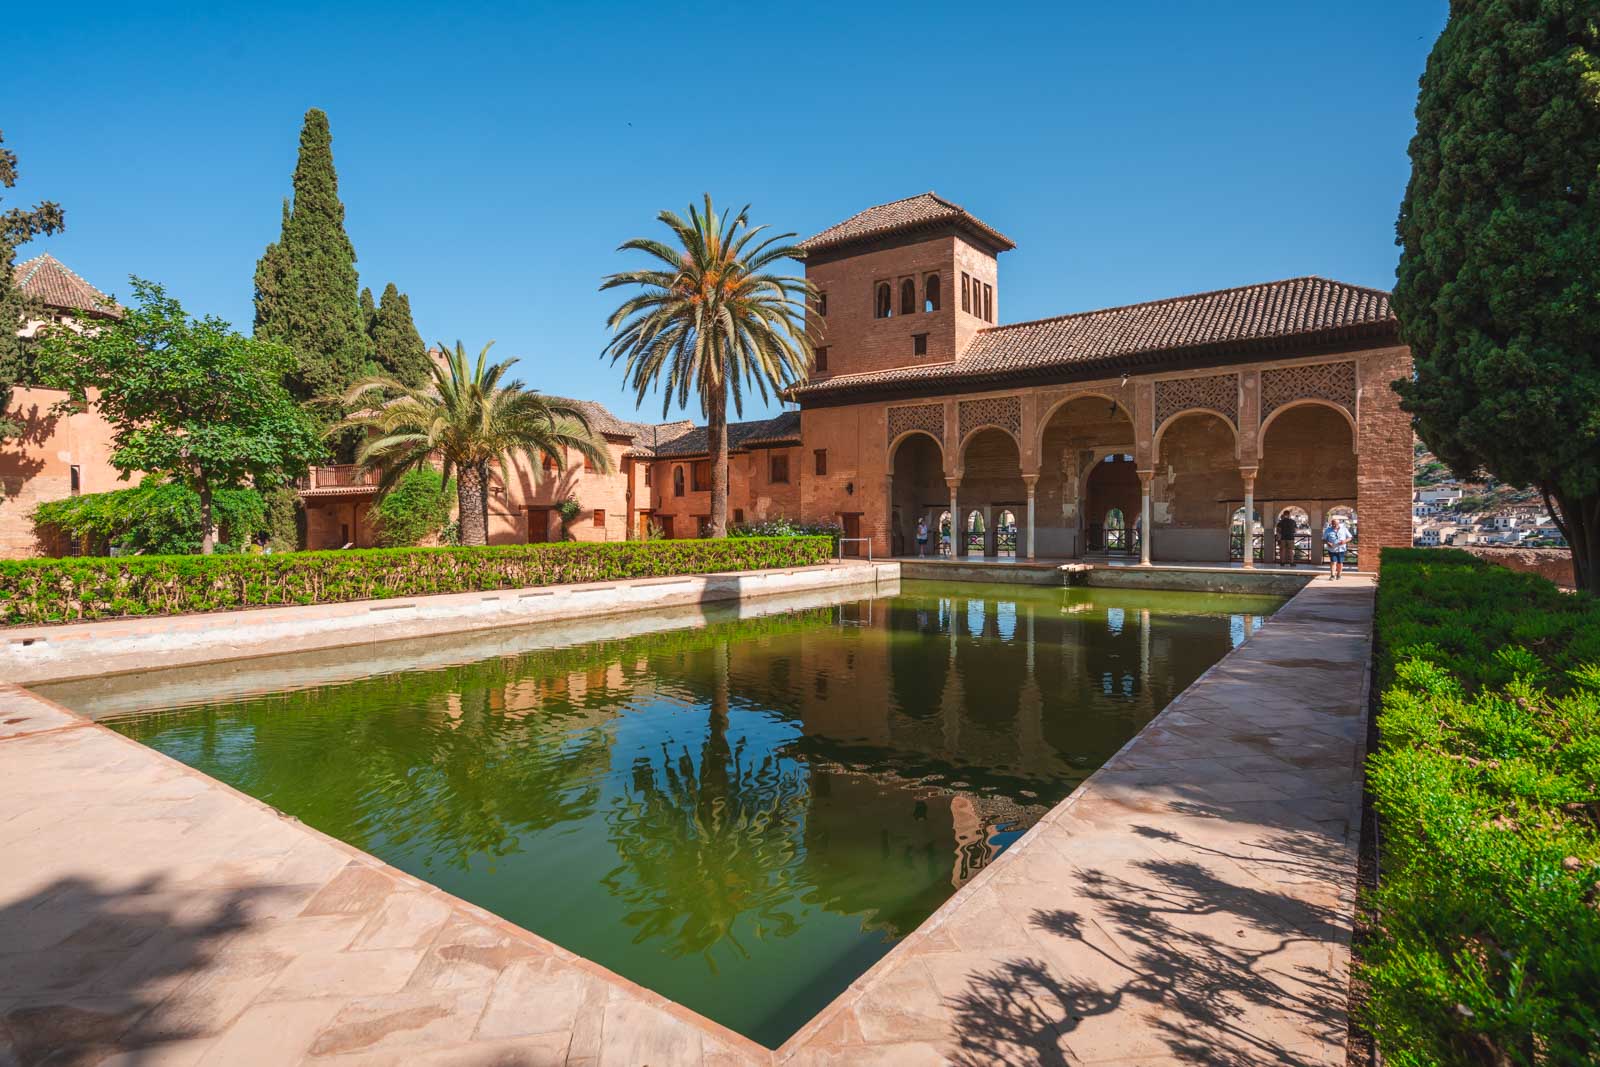 Tips for photos inside The Alhambra Granada Andalusia